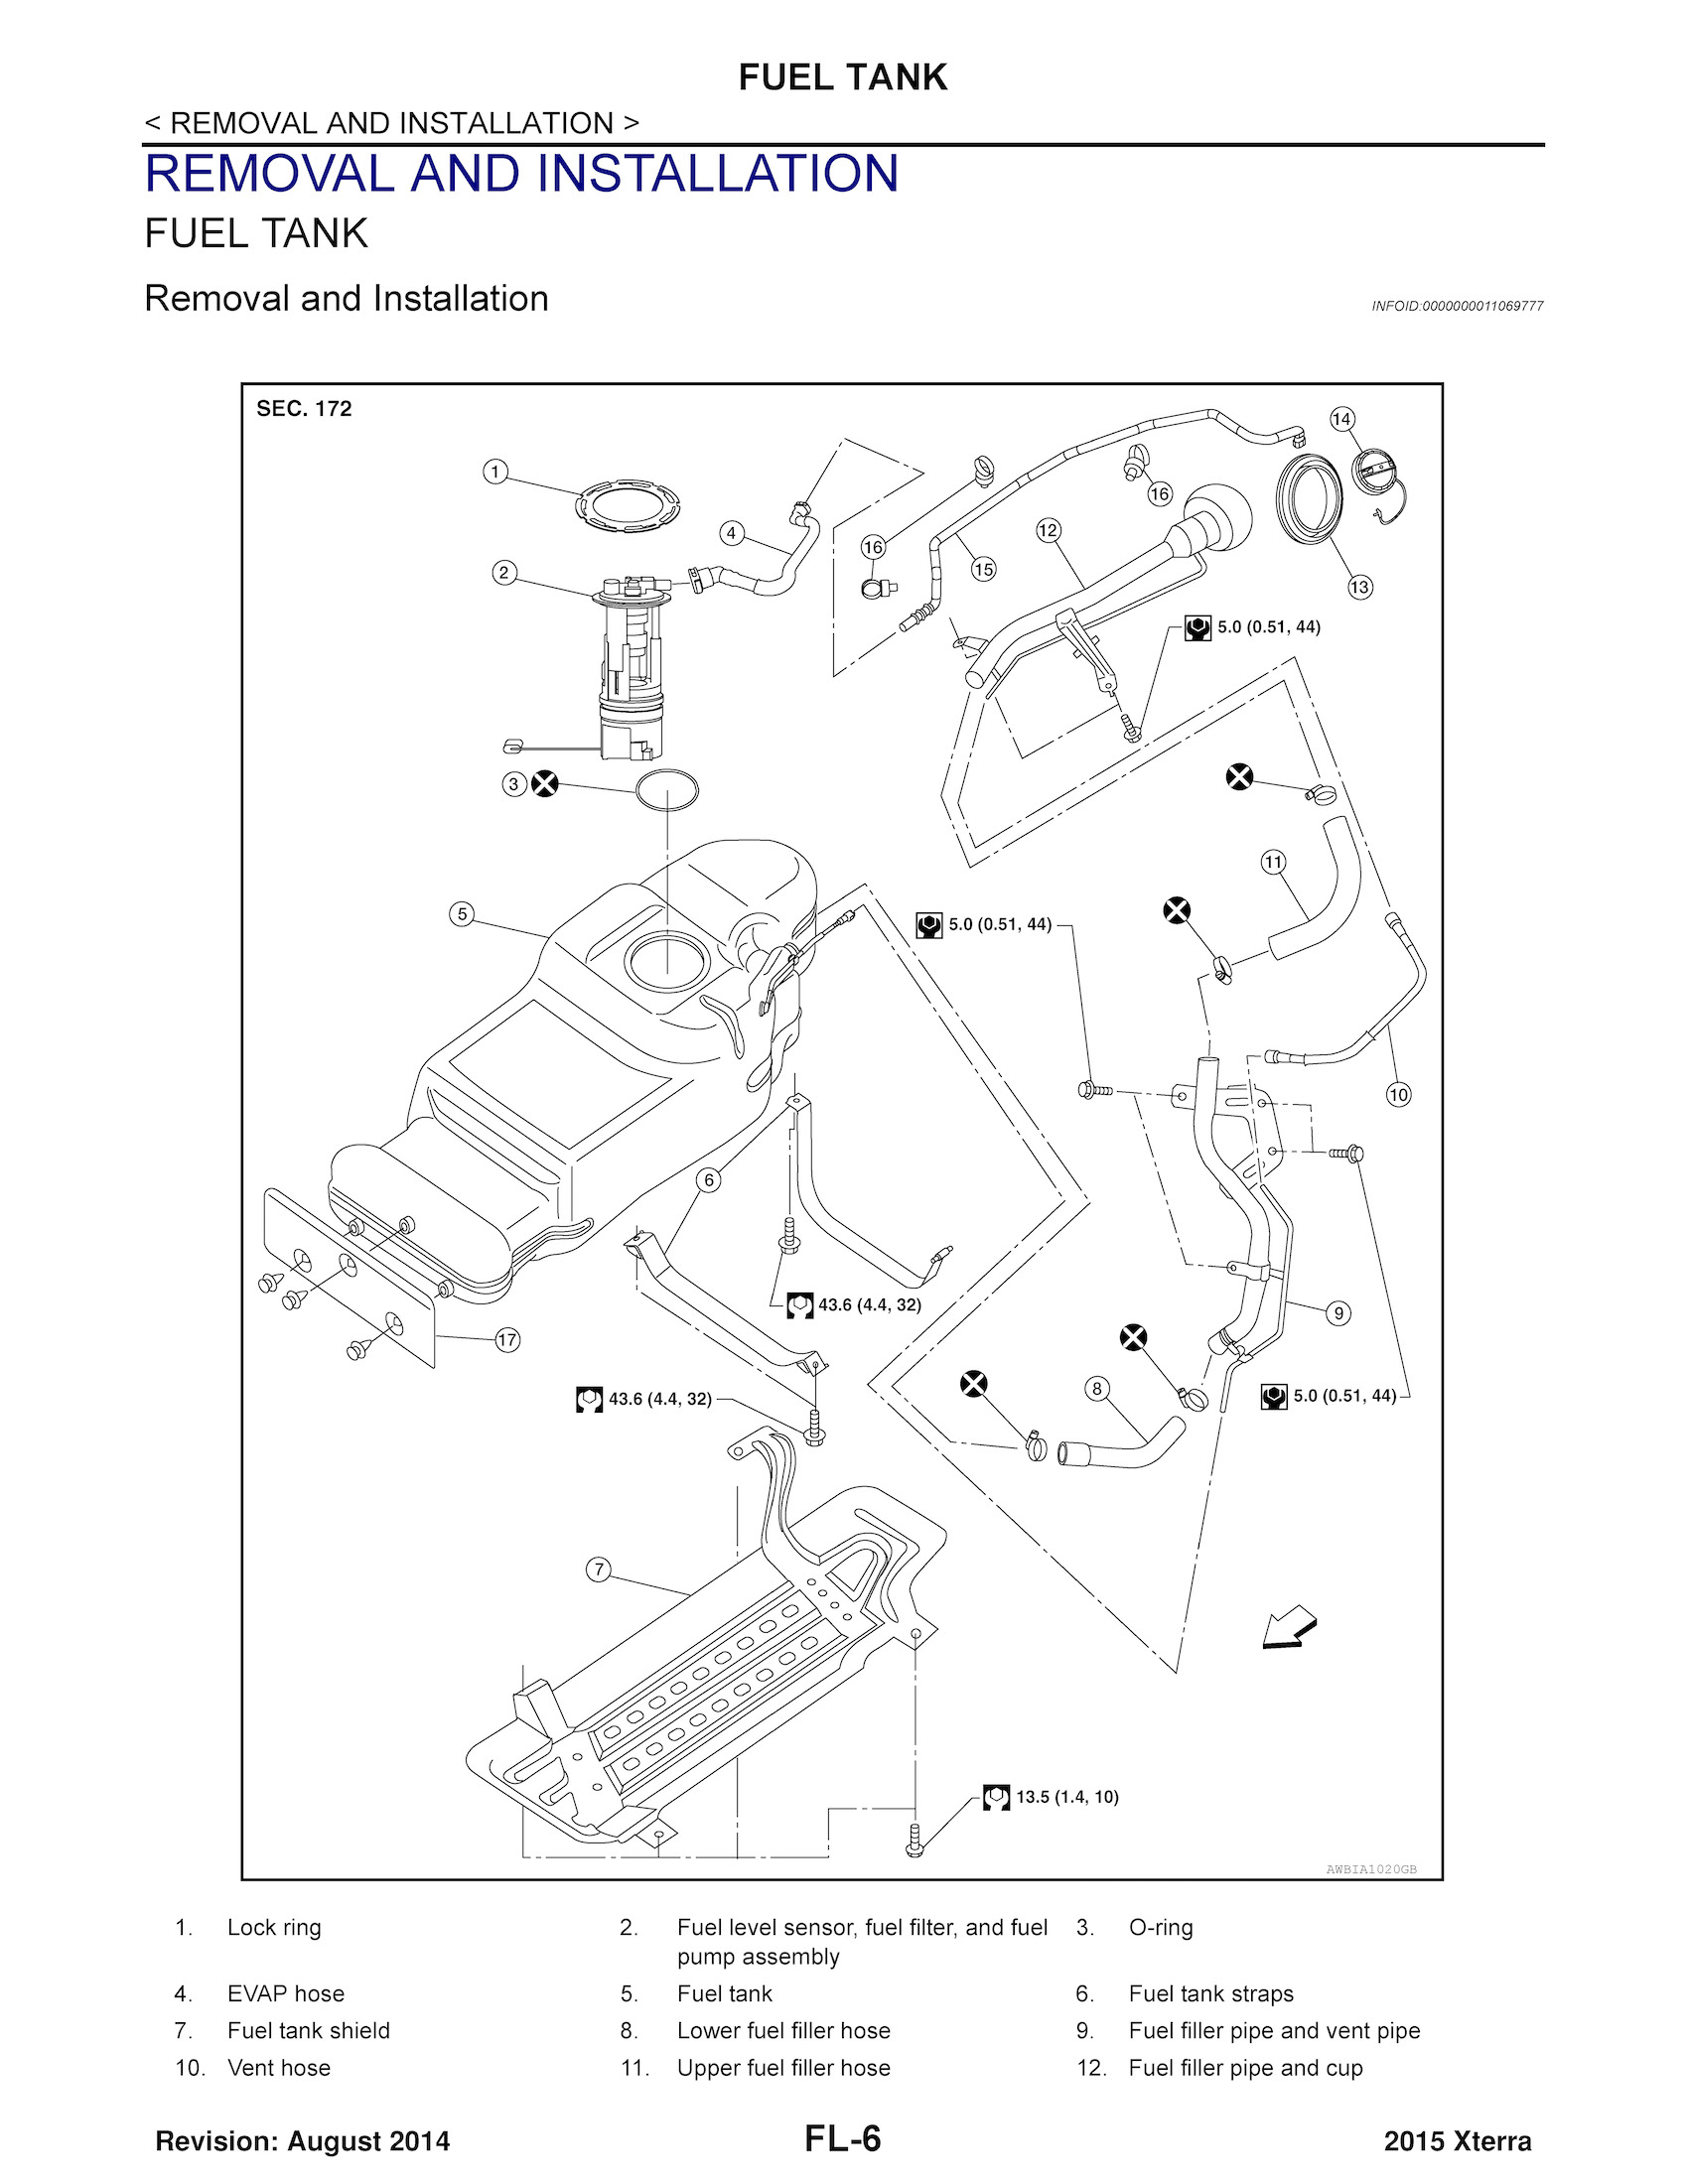 2015 Nissan Xterra Repair Manual, Fuel Tank Removal and Installation